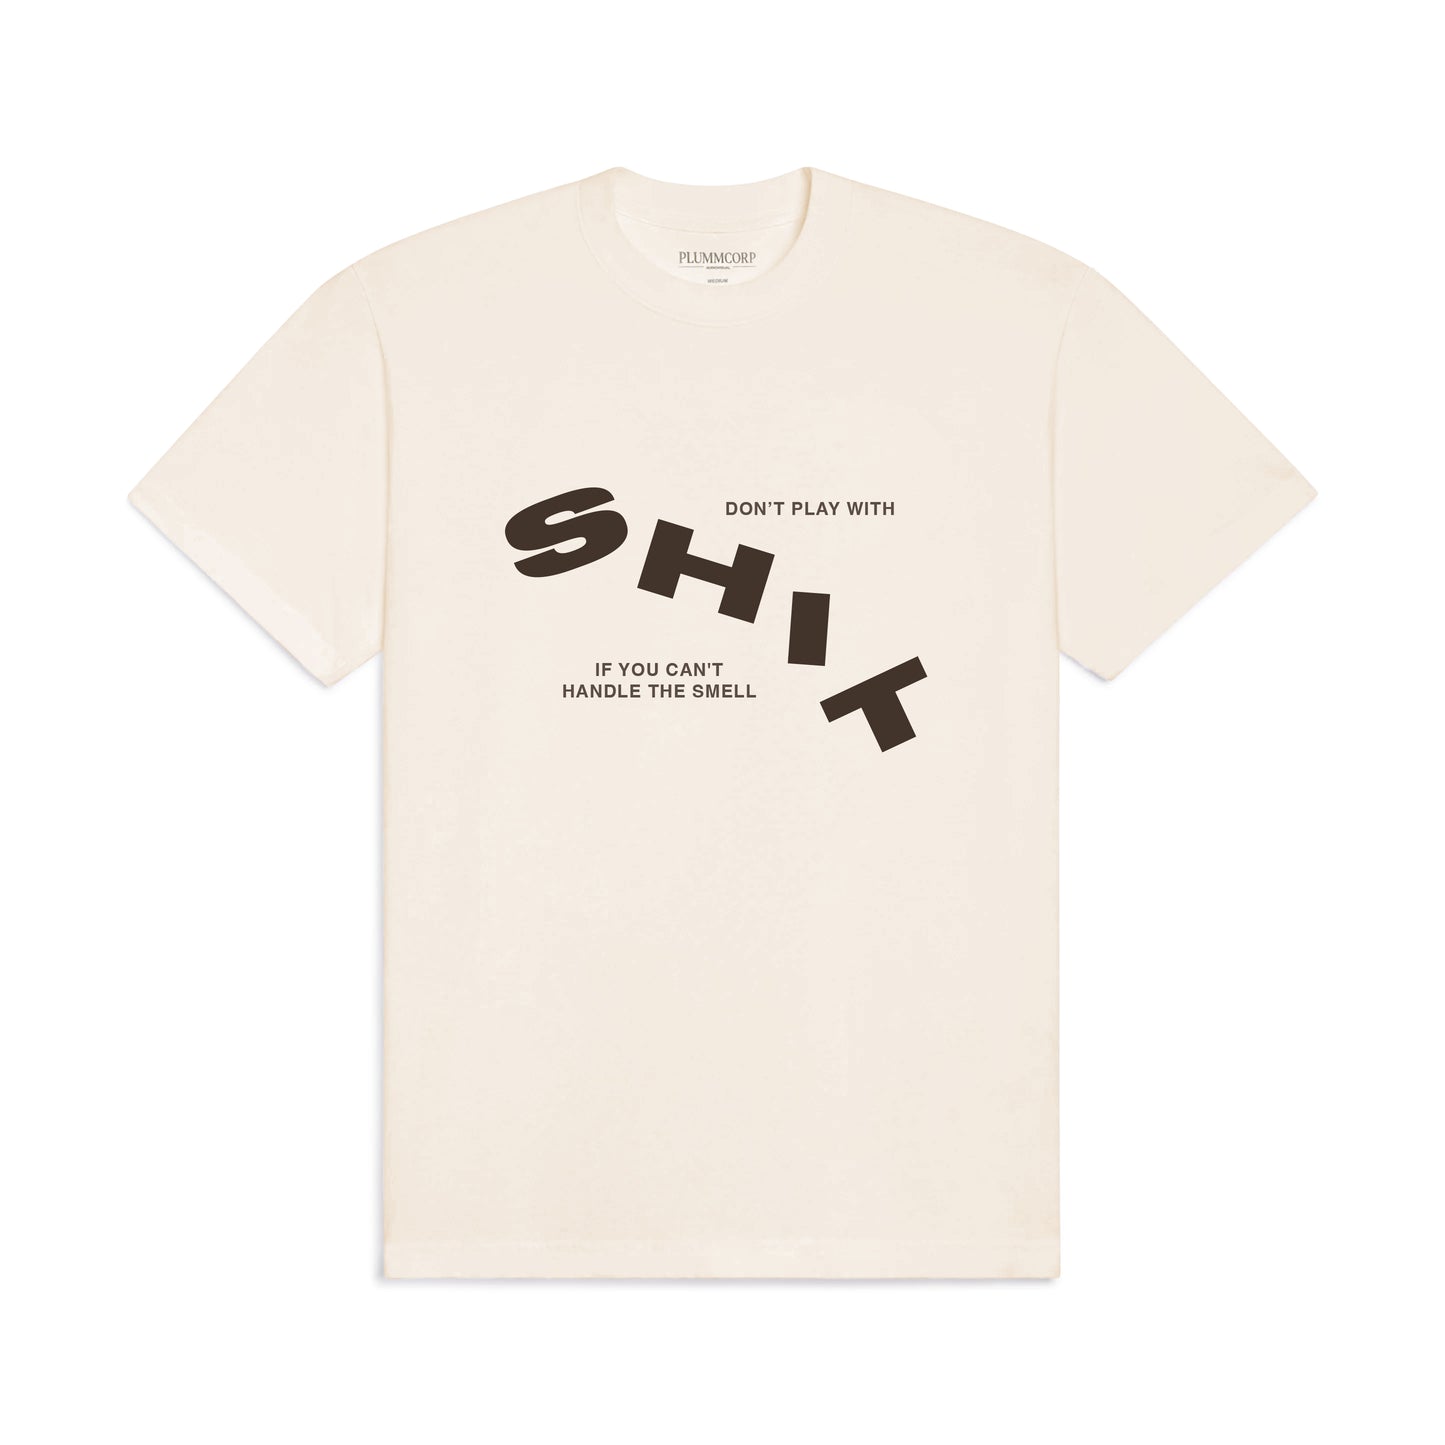 Ivory "DON'T PLAY WITH SHIT" Tee (pre-order)